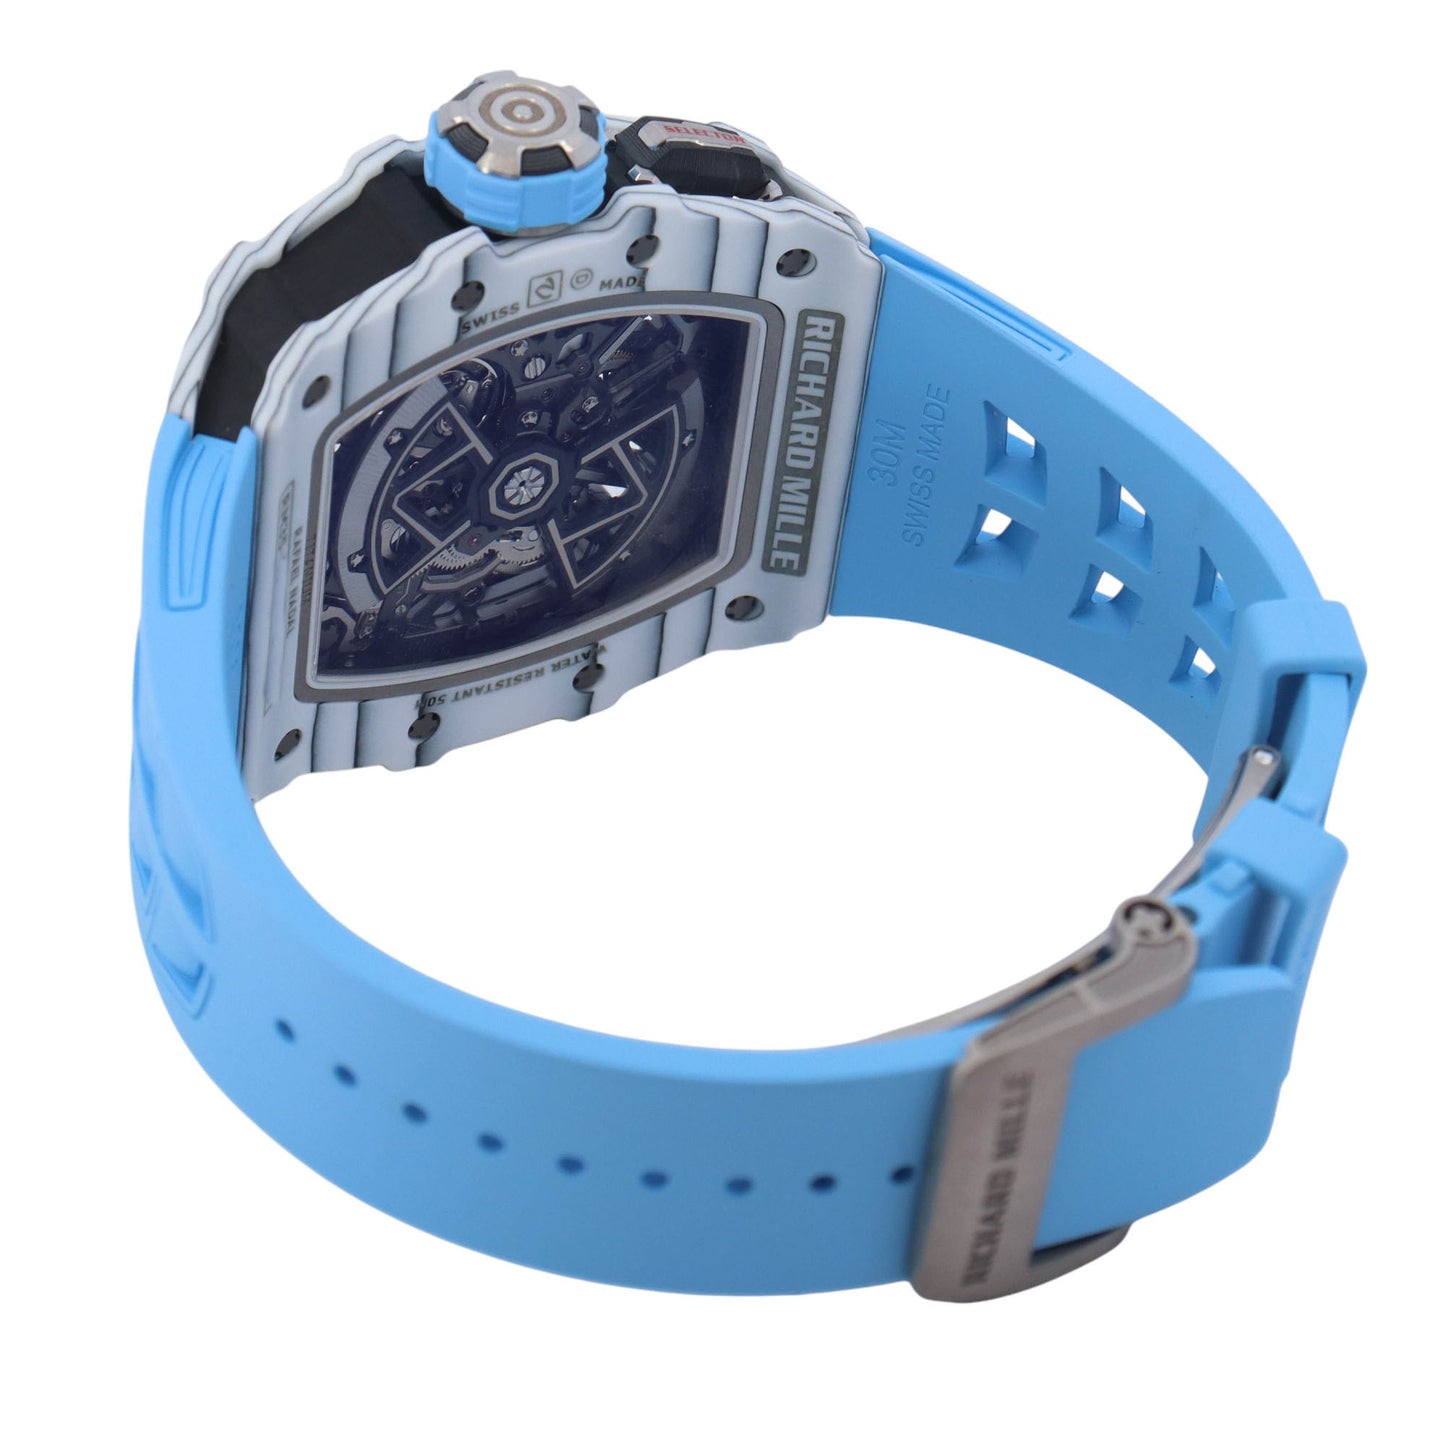 Richard Mille RM35-03 Rafael Nadal White TPT Carbon 43mm Skeleton Arabic & Stick Dial Watch  Reference #: RM35-03 - Happy Jewelers Fine Jewelry Lifetime Warranty